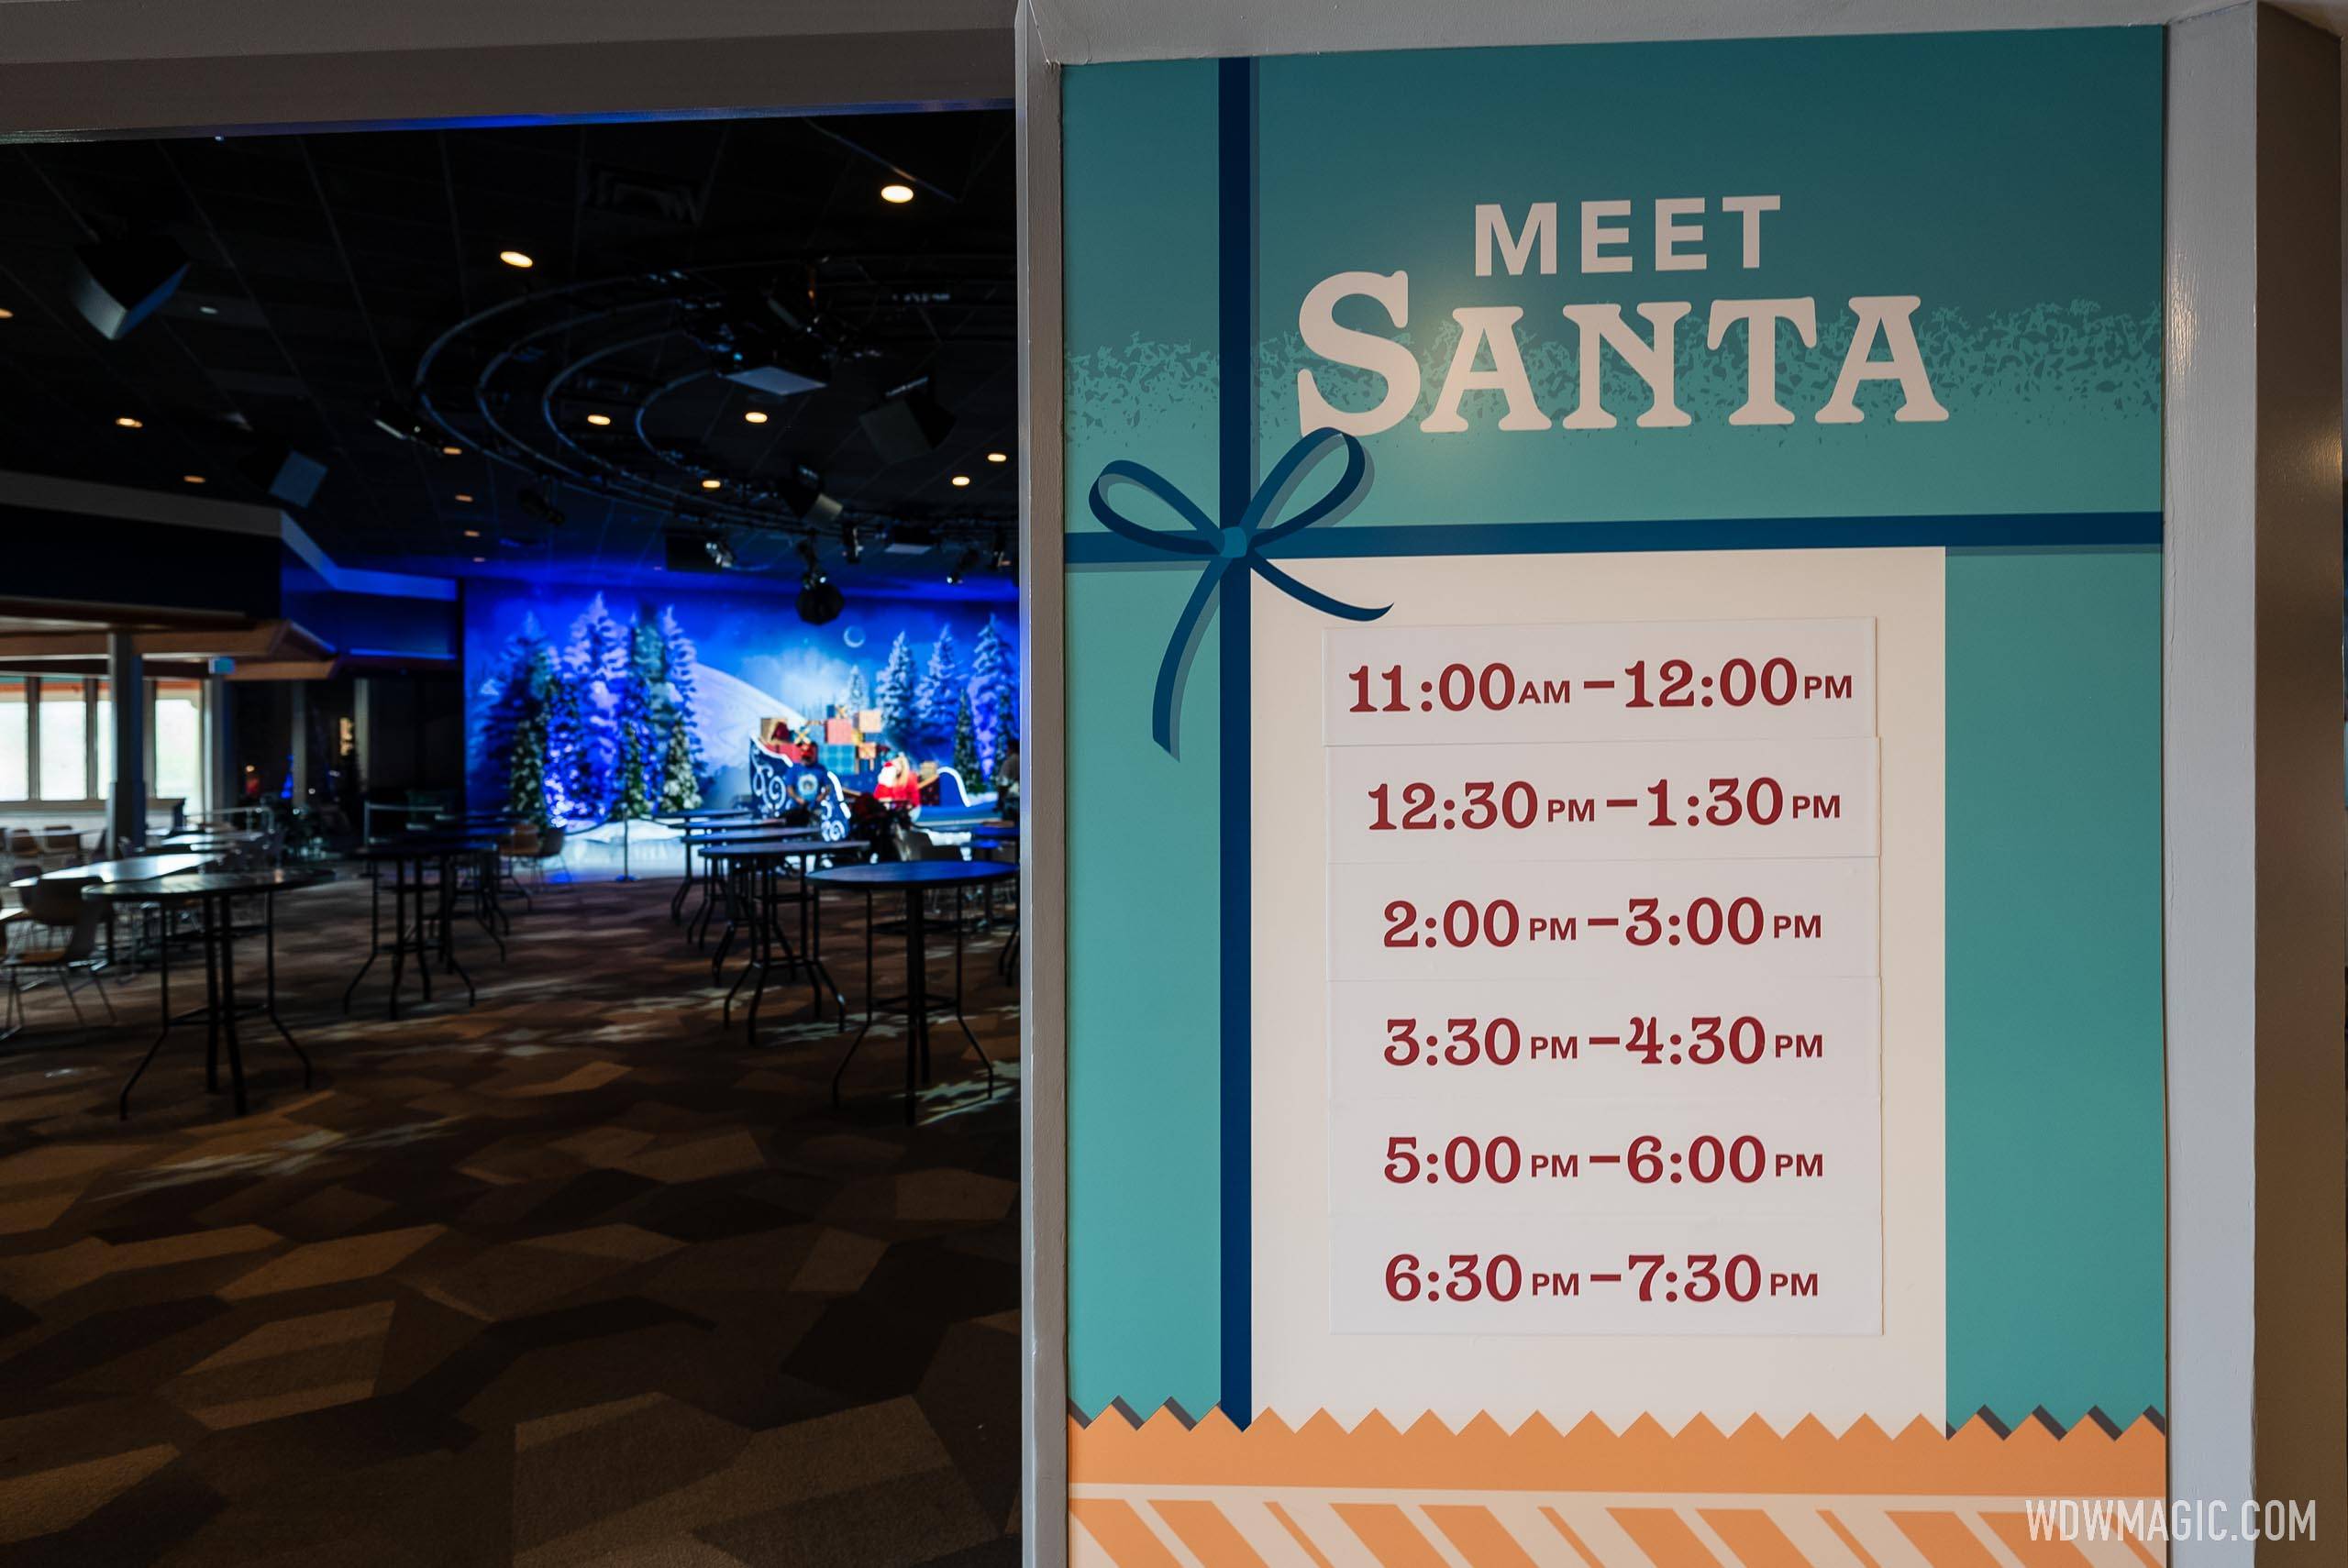 2022 Epcot International Festival of the Holidays - Santa Clause meet and greet